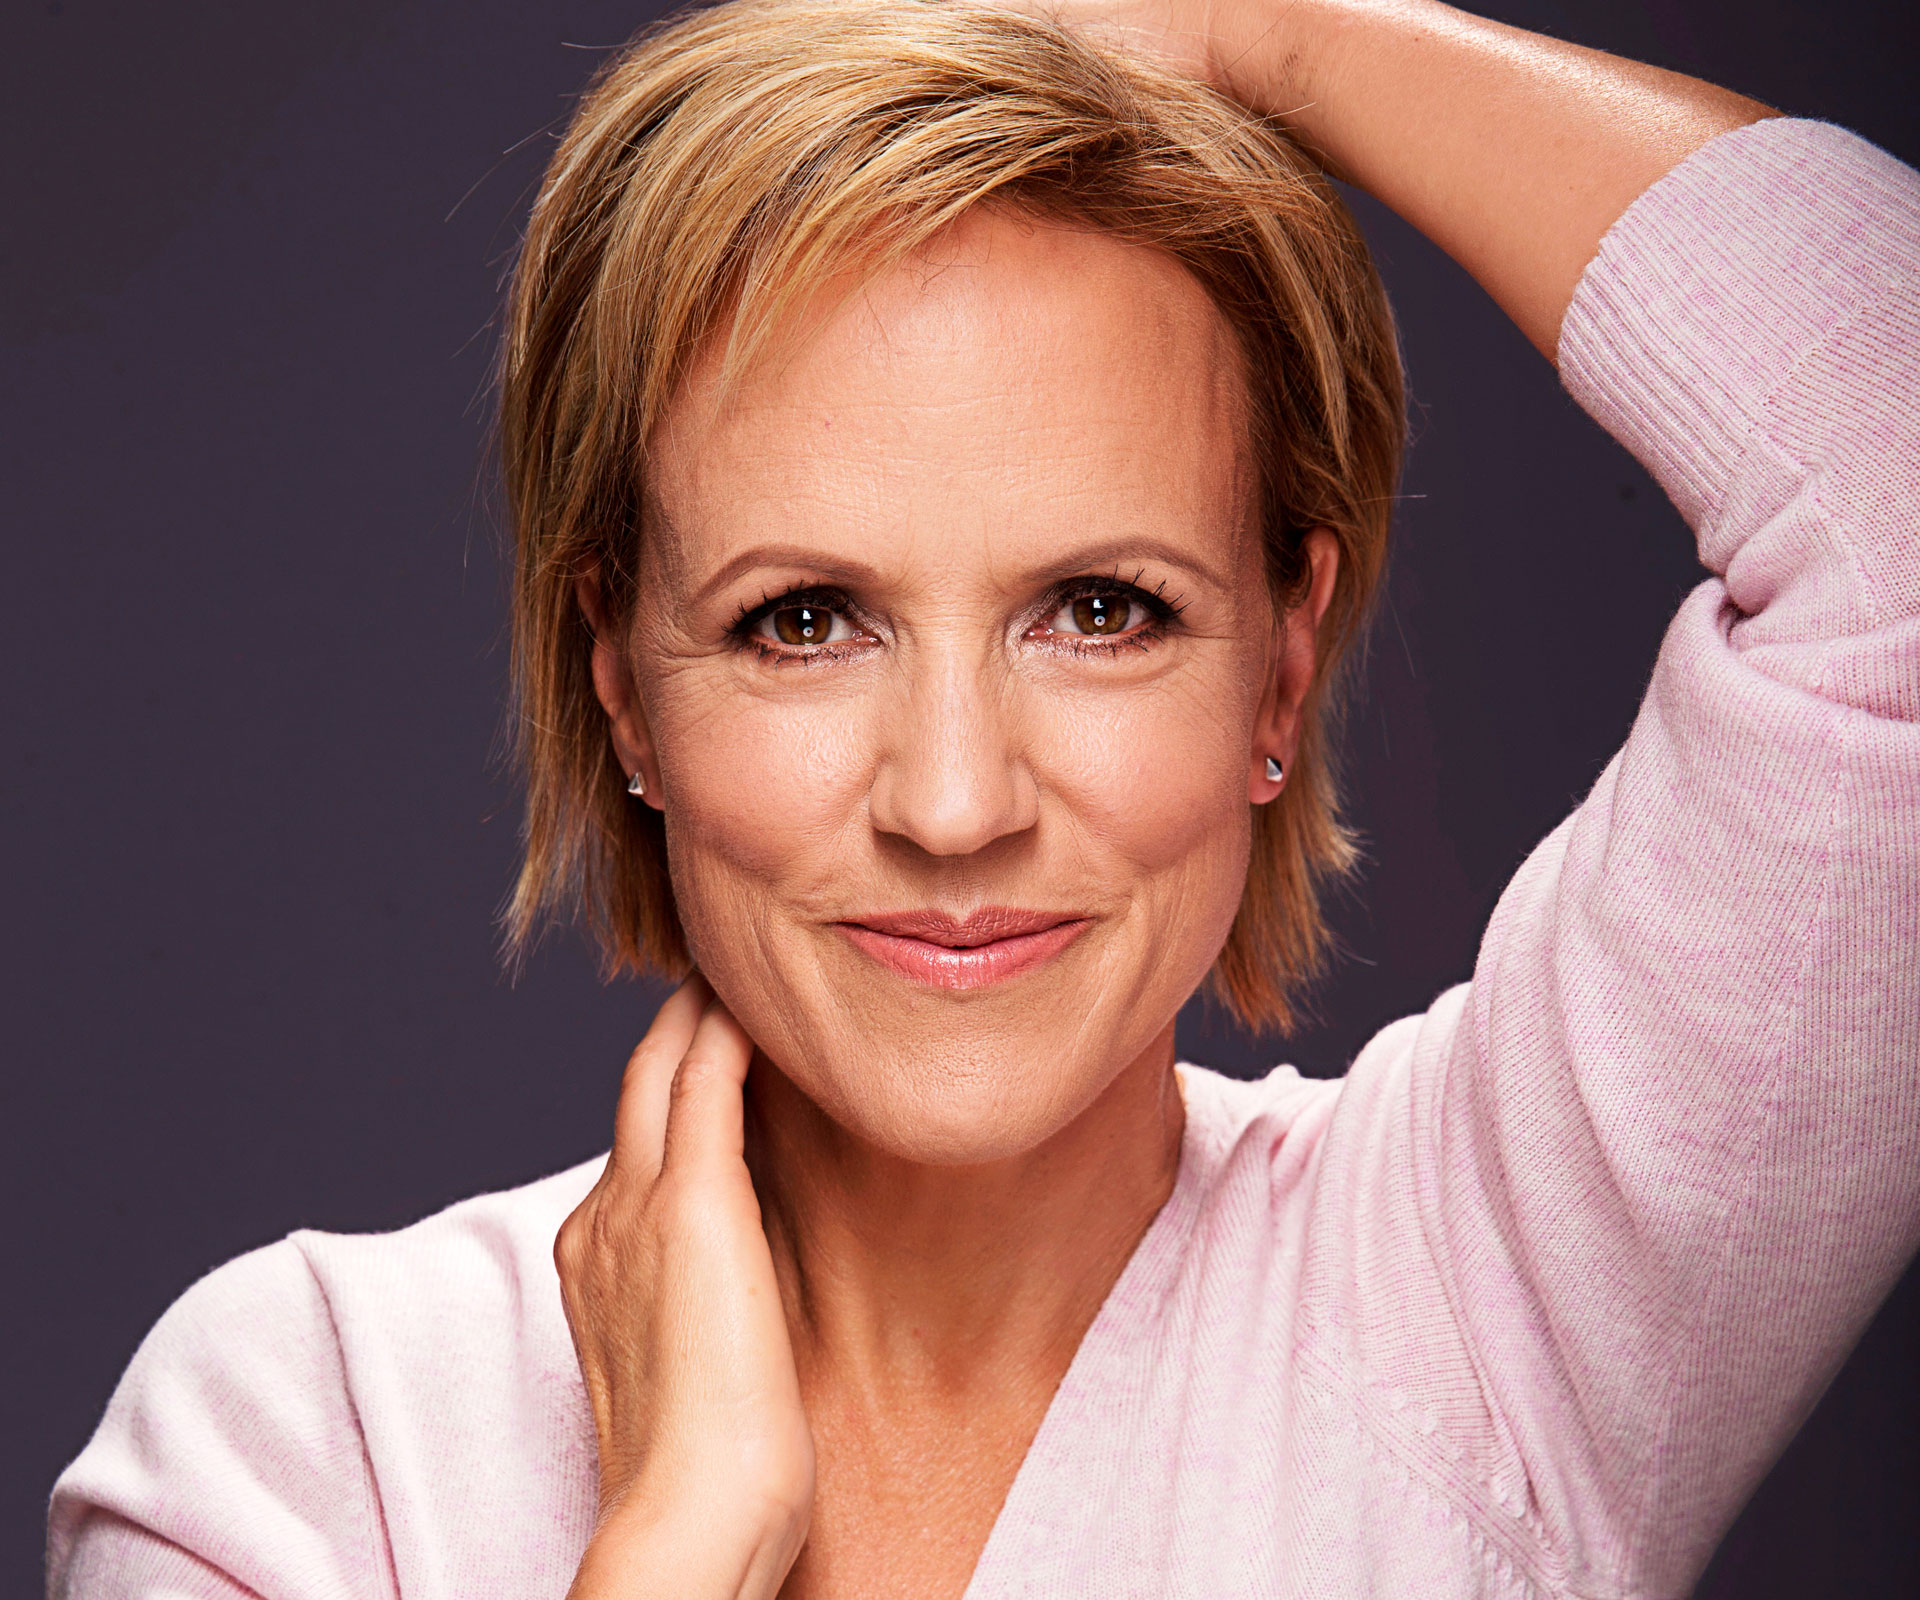 Hilary Barry accepts no makeup challenge